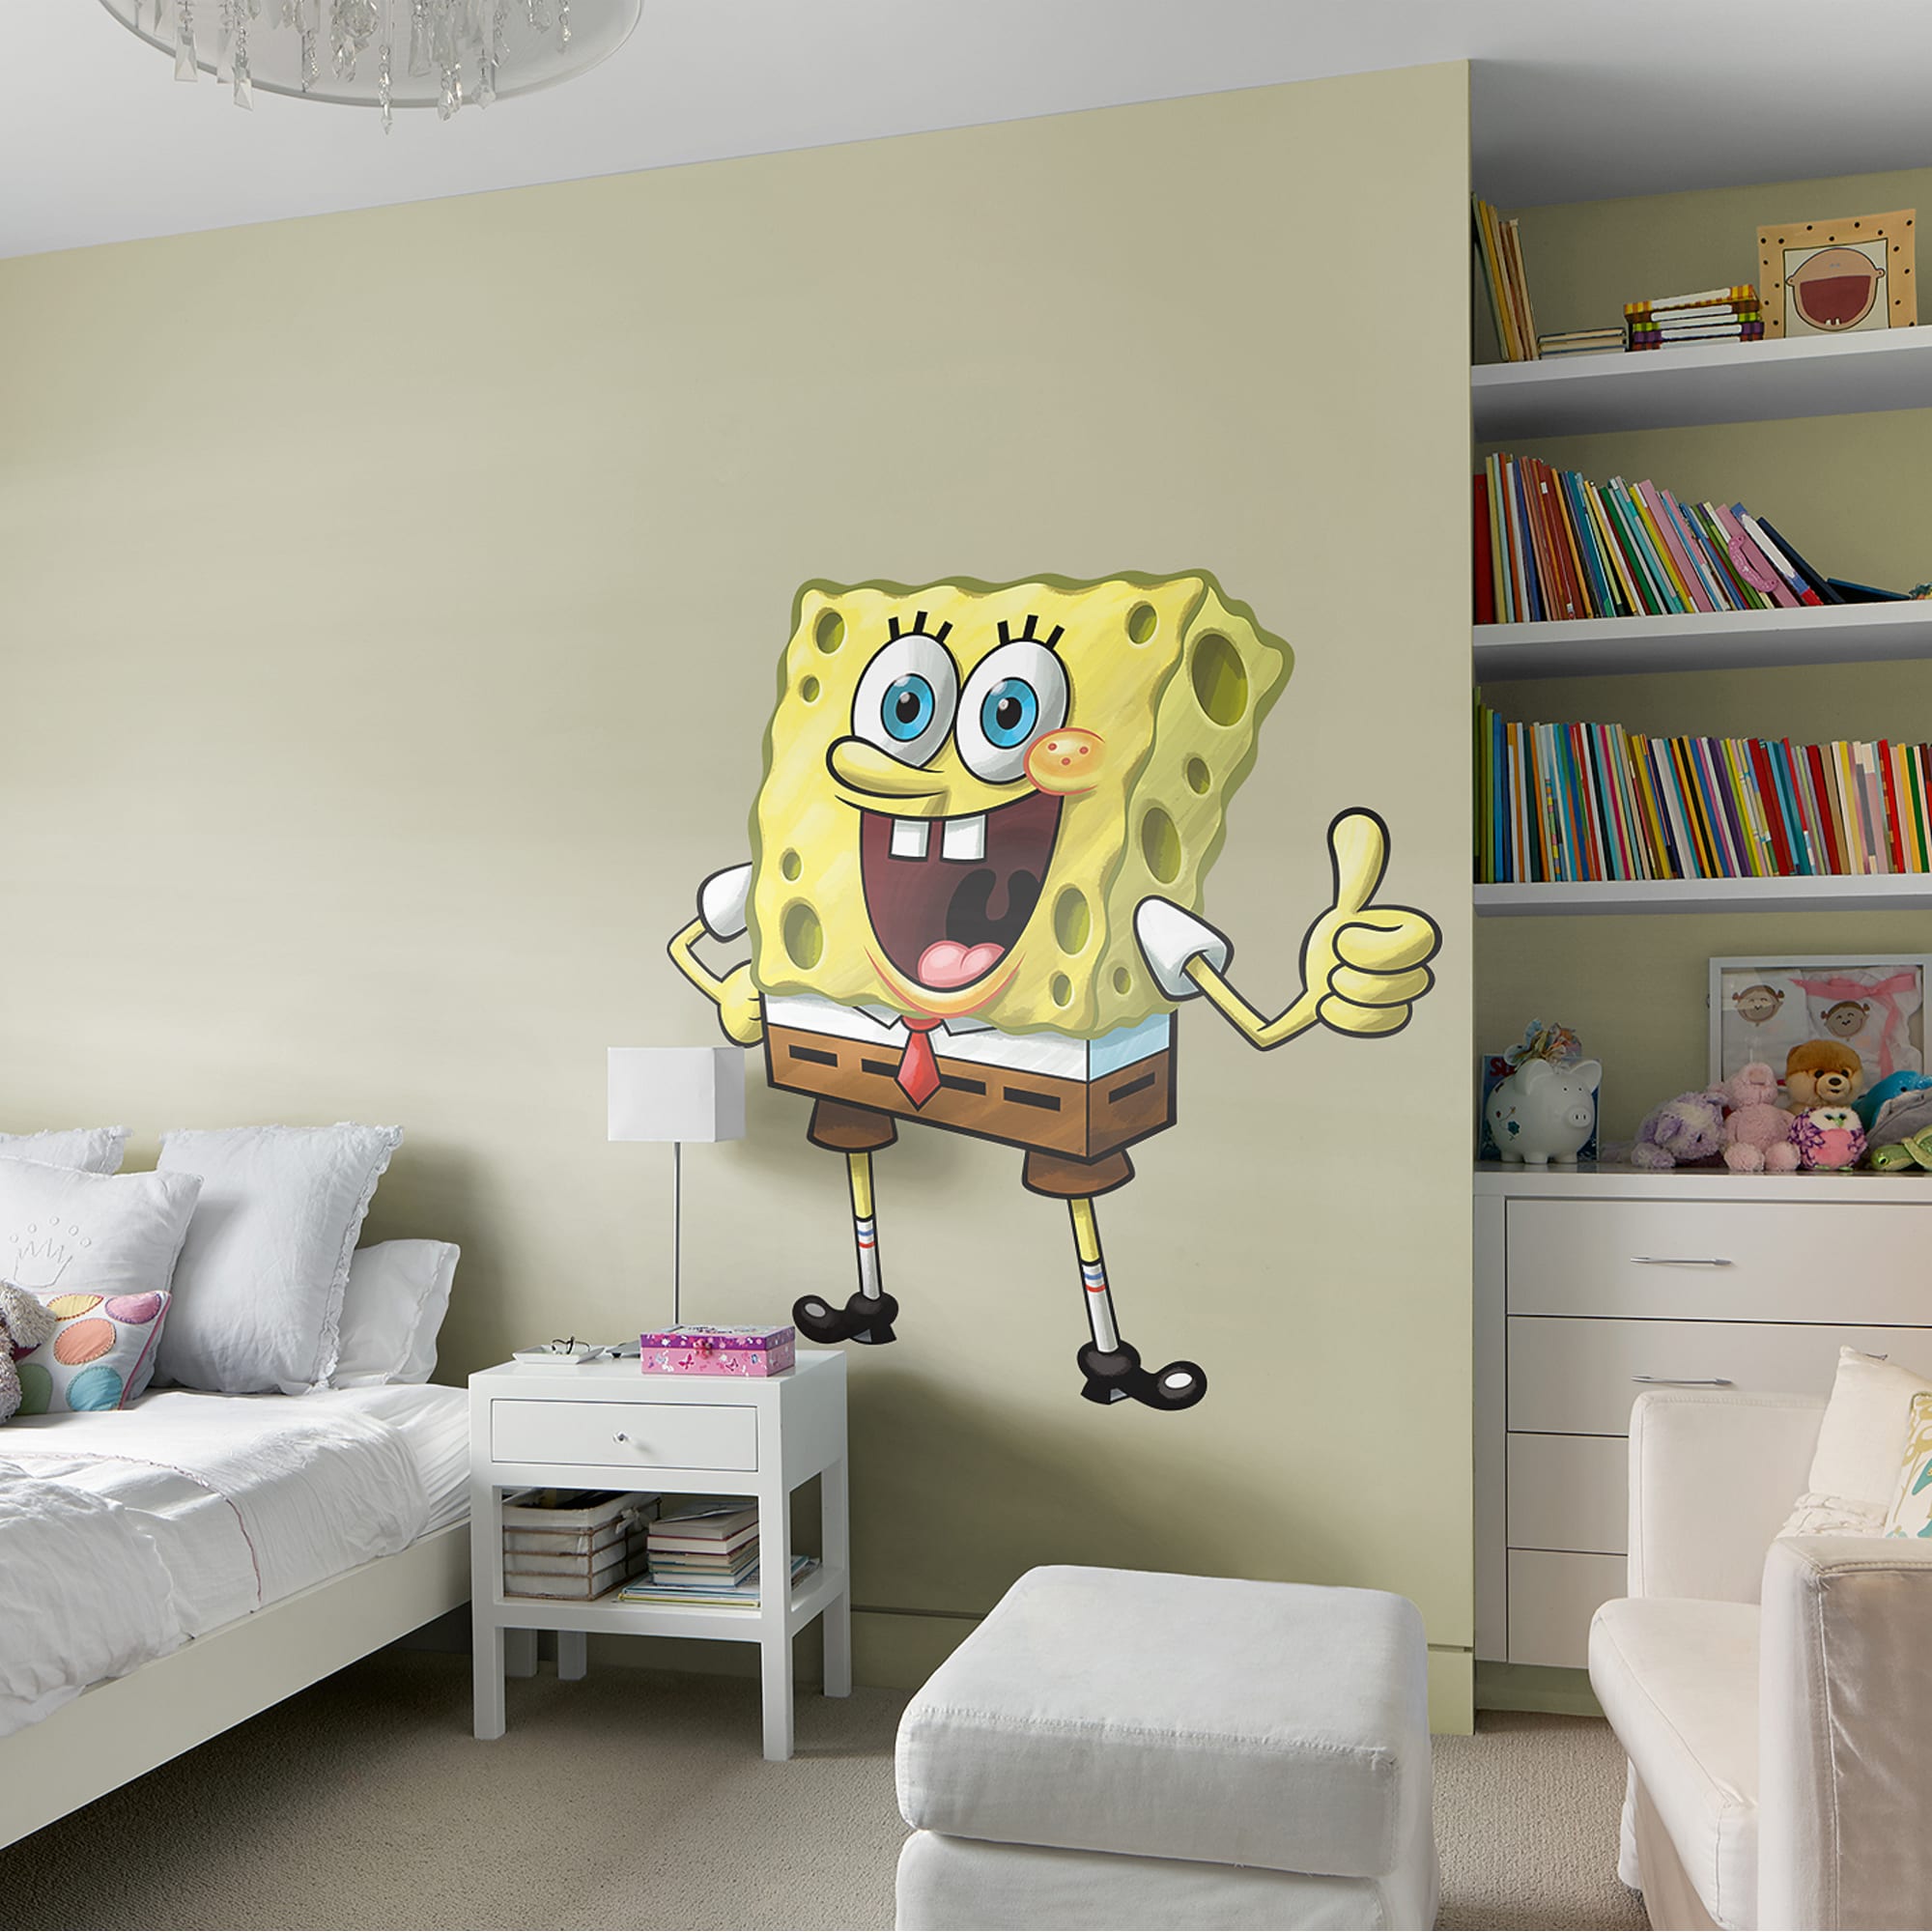 SpongeBob SquarePants - Officially Licensed Removable Wall Decal 46.0"W x 51.0"H by Fathead | Vinyl